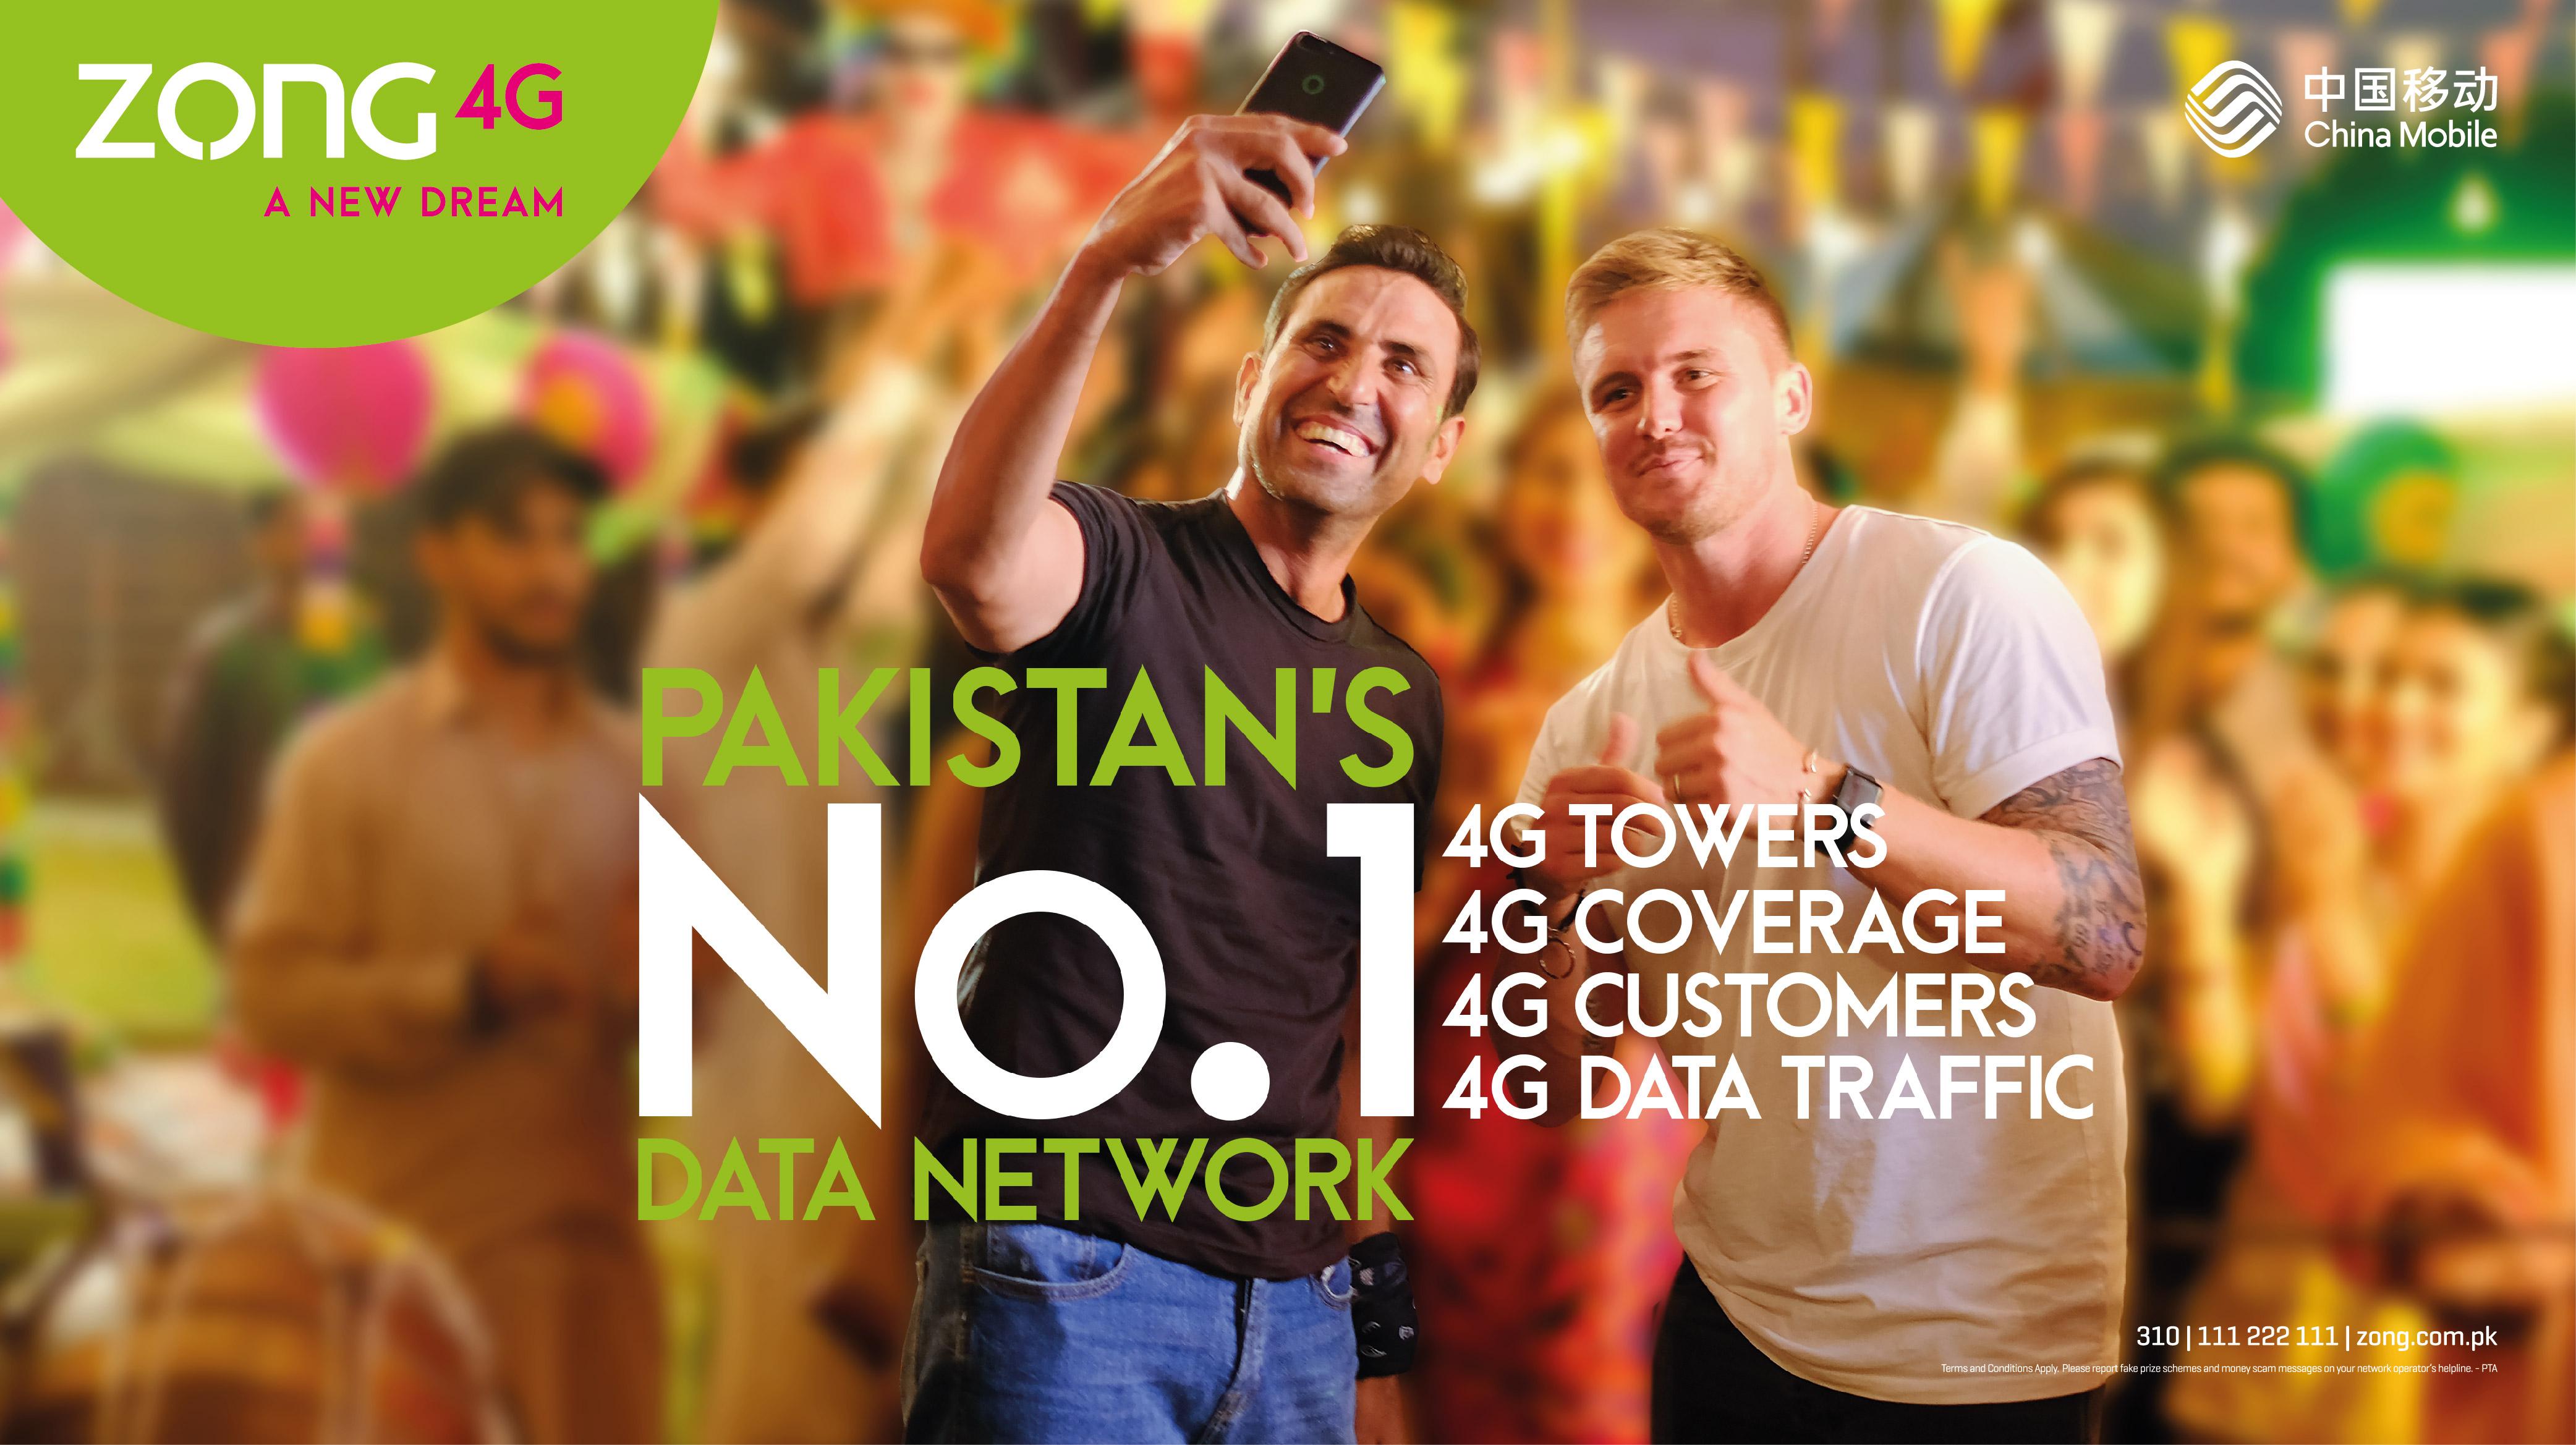 Largest 4G subscribers, Widest 4G Network, Highest 4G data Traffic and over 12000 4G towers Affirms Zong 4G as the industry Leader